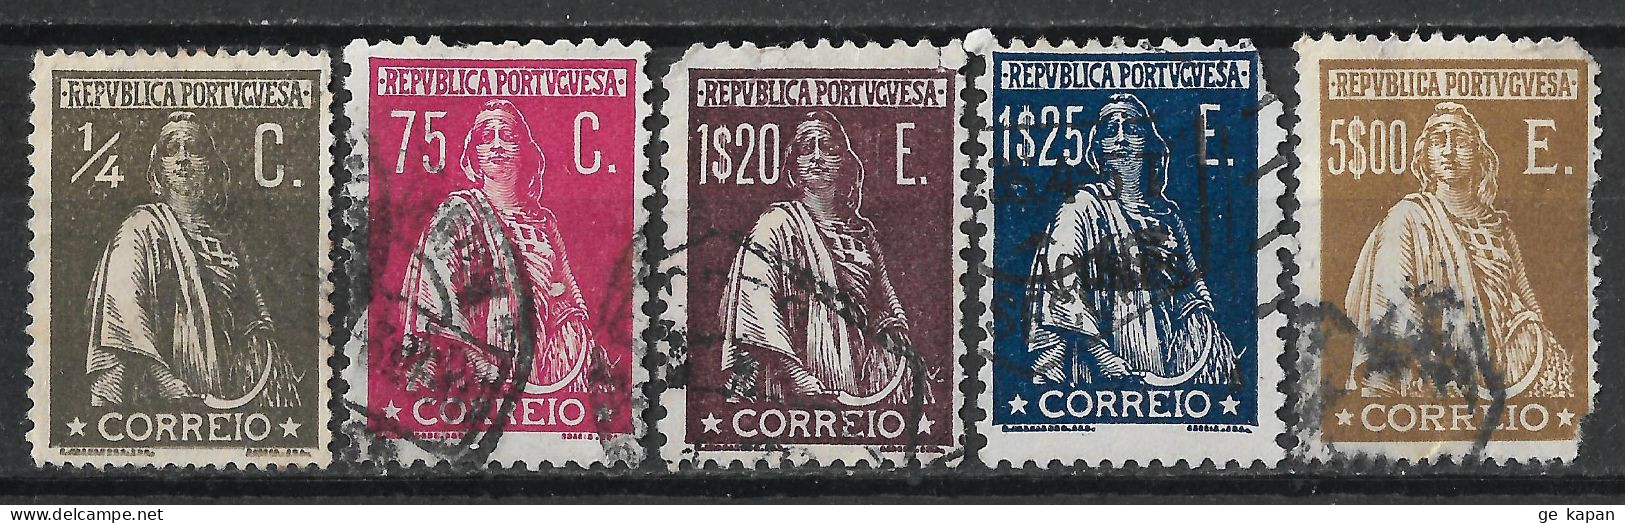 1912-1930 PORTUGAL SET OF 5 USED STAMPS (Michel # 204Ax,428,524,527,528) CV €8.30 - Usado